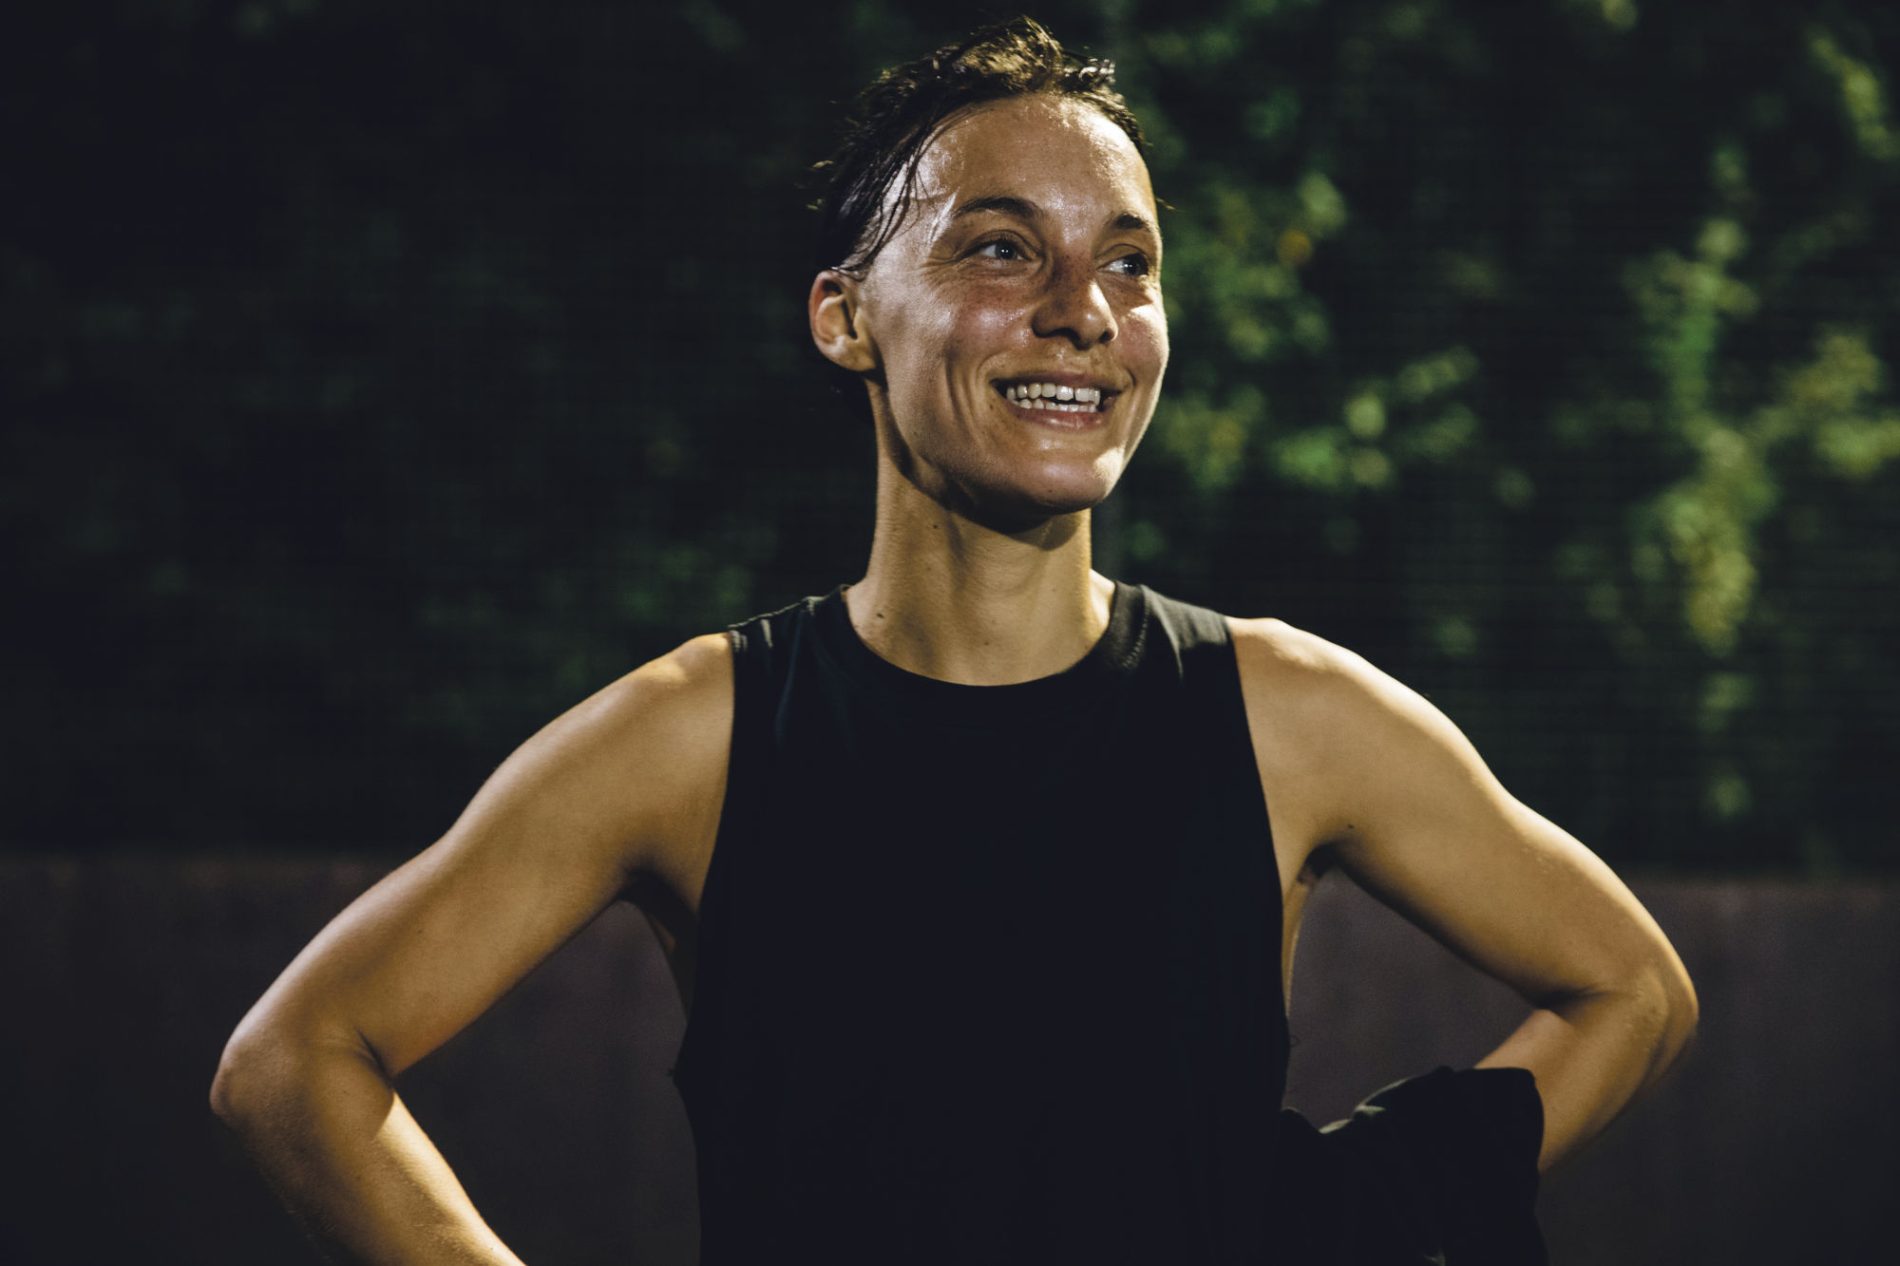 A female football player is smiling during an evening football match.